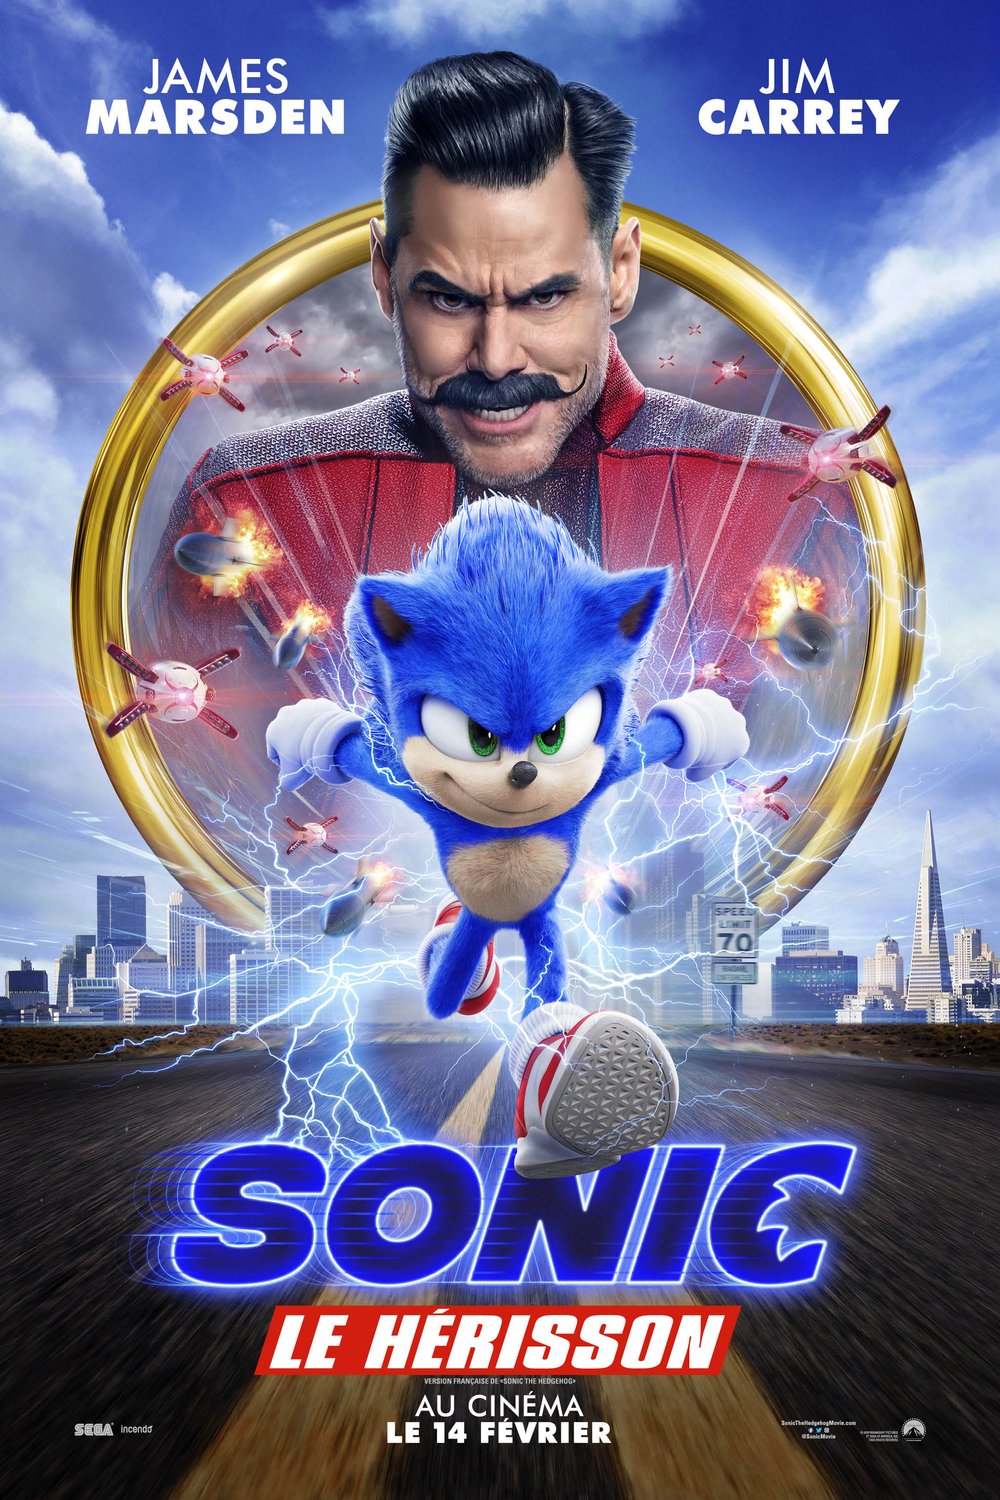 Poster of the movie Sonic Le Hérisson